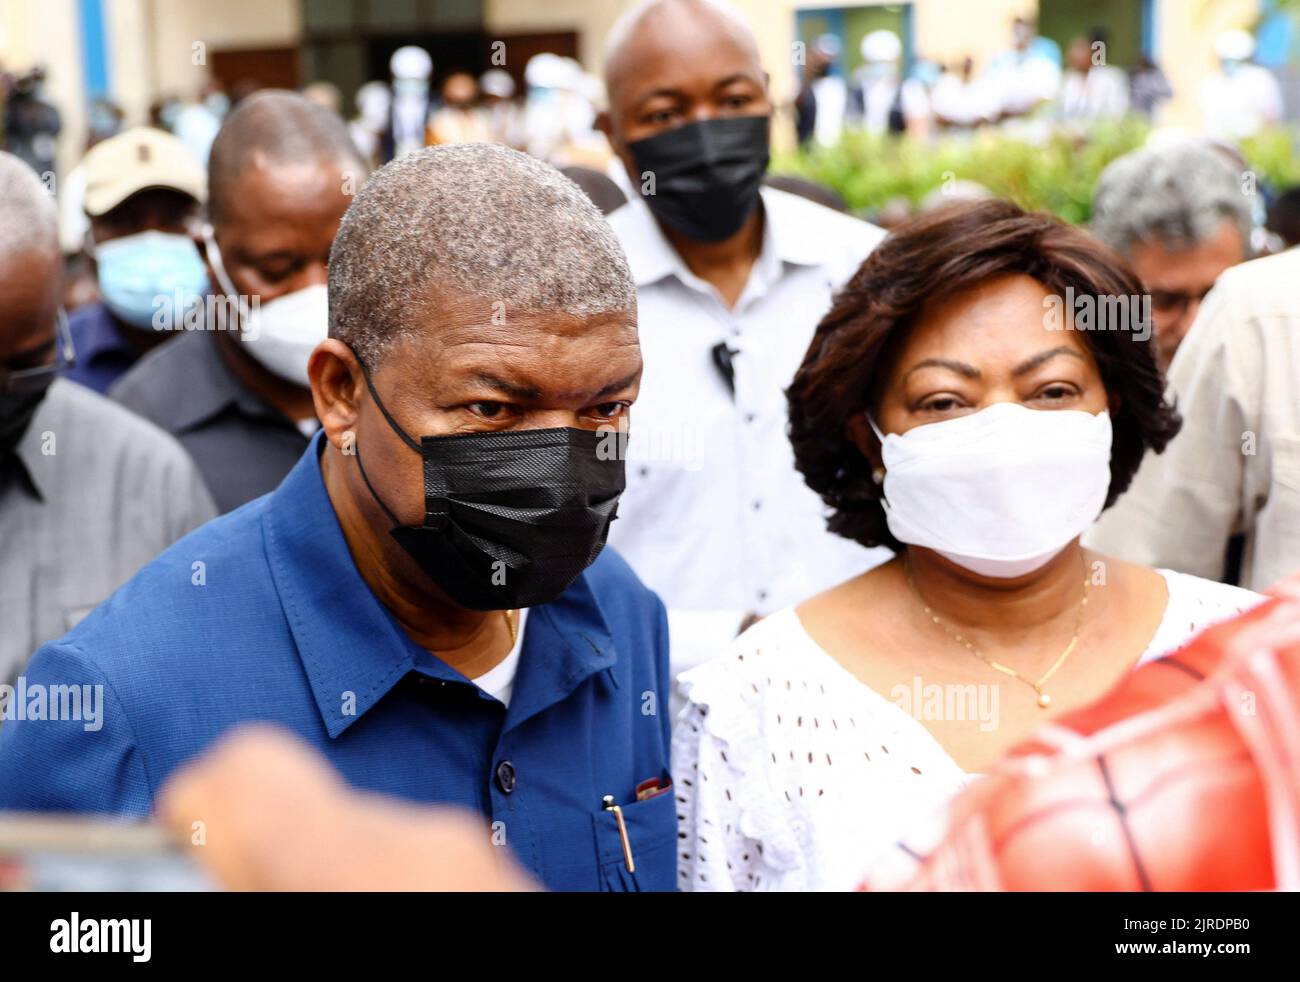 Angola's President and leader of the People's Movement for the Liberation of Angola (MPLA) ruling party, Joao Lourenco, leaves accompanied by his wife Ana Dias Lourenco, after casting his vote in the general election in the capital Luanda, Angola August 24, 2022. REUTERS/Siphiwe Sibeko Stock Photo